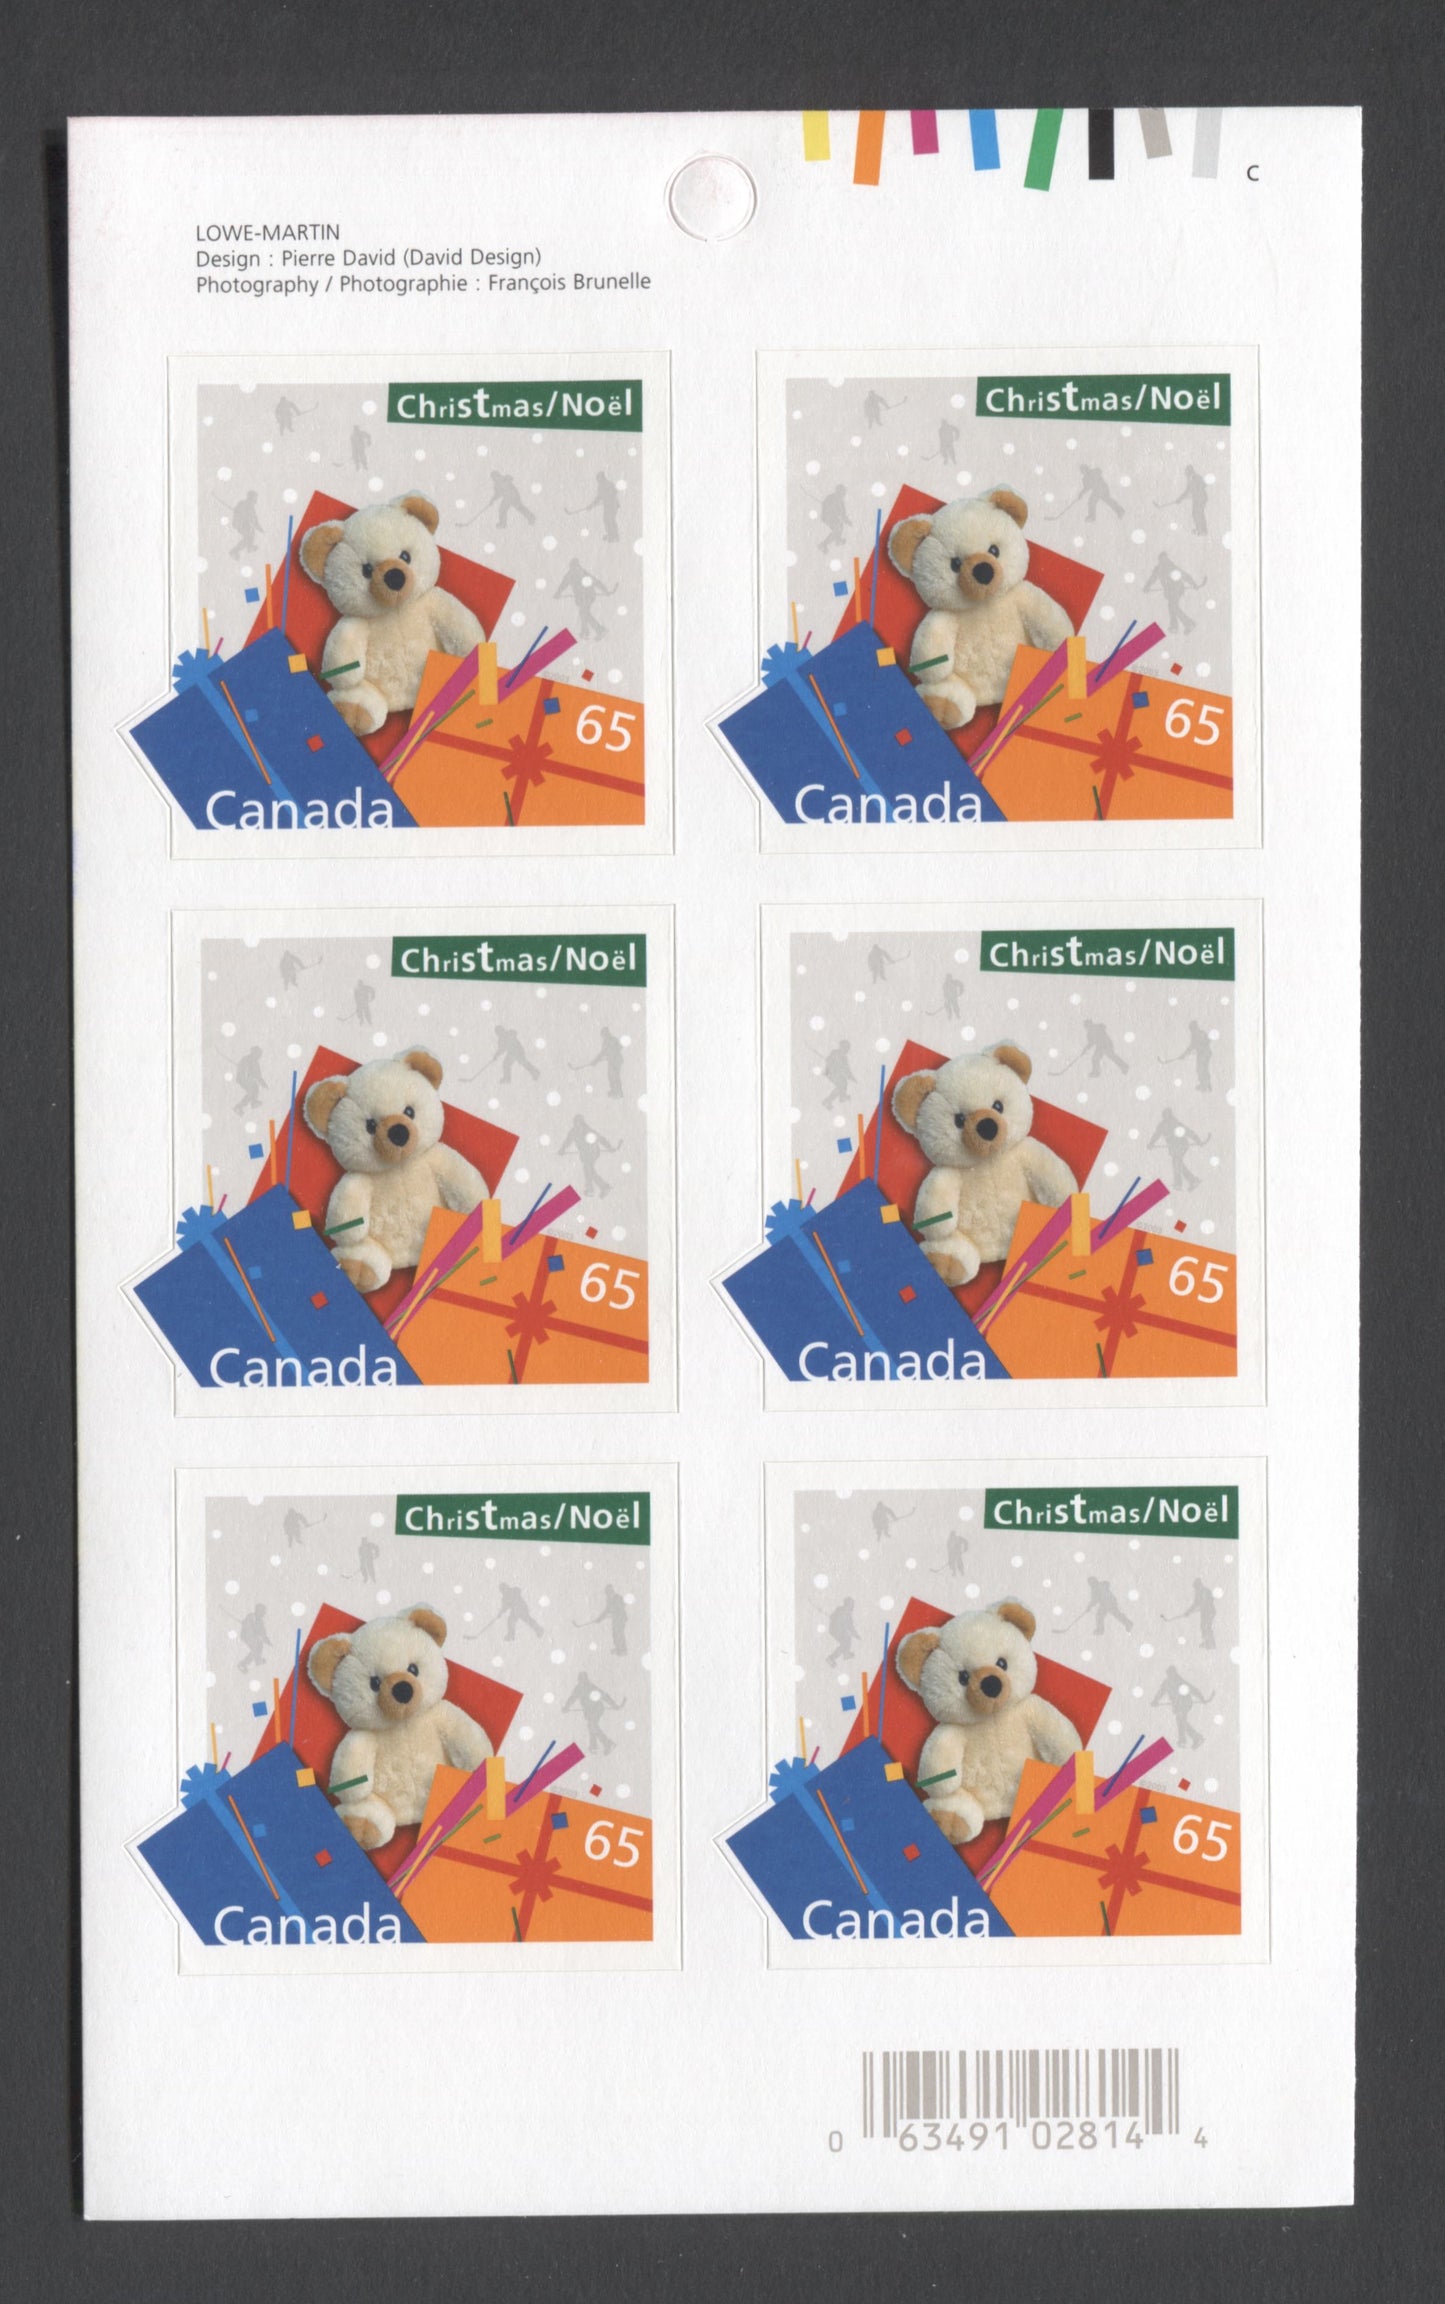 Canada #BK278 2003 Christmas Issue, Complete $3.90 Booklet, Tullis Russell Coatings Paper, Dead Paper, 4 mm GT-4 Tagging